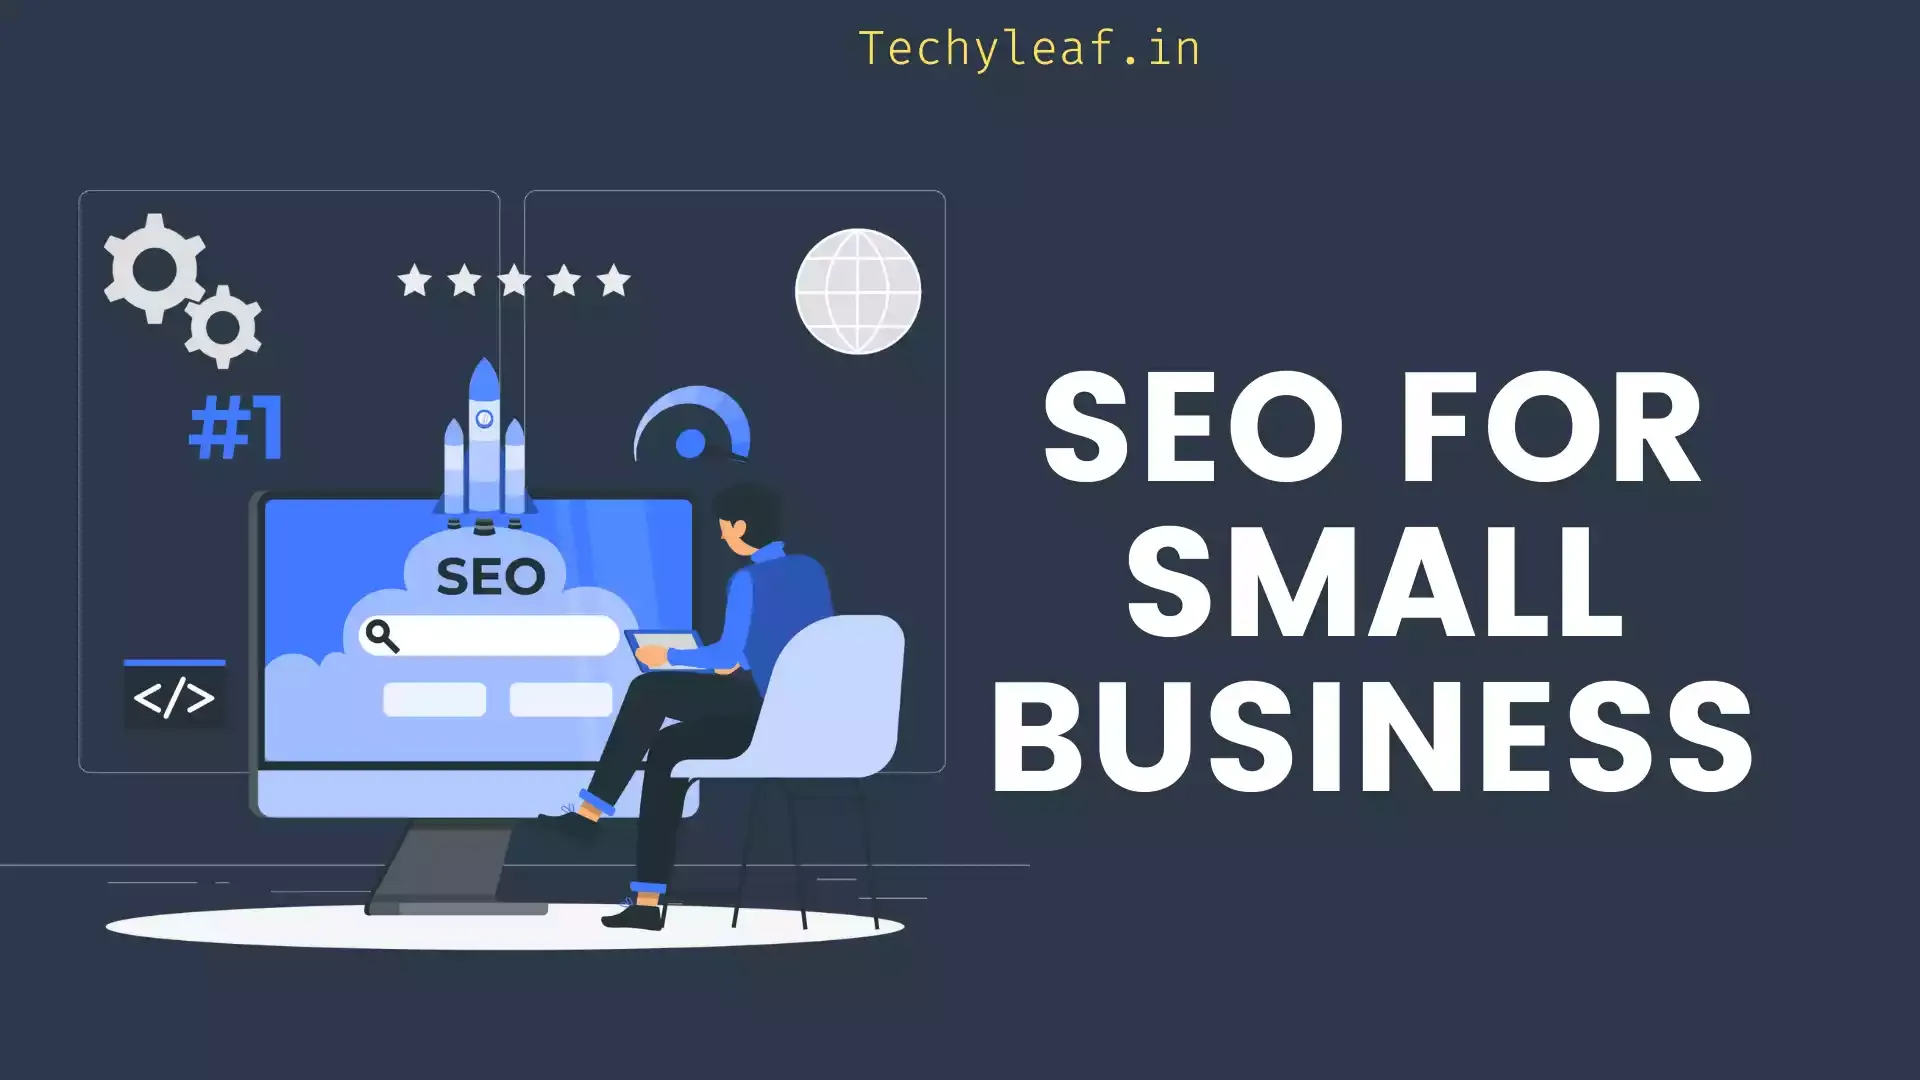 Why SEO is important for Small business